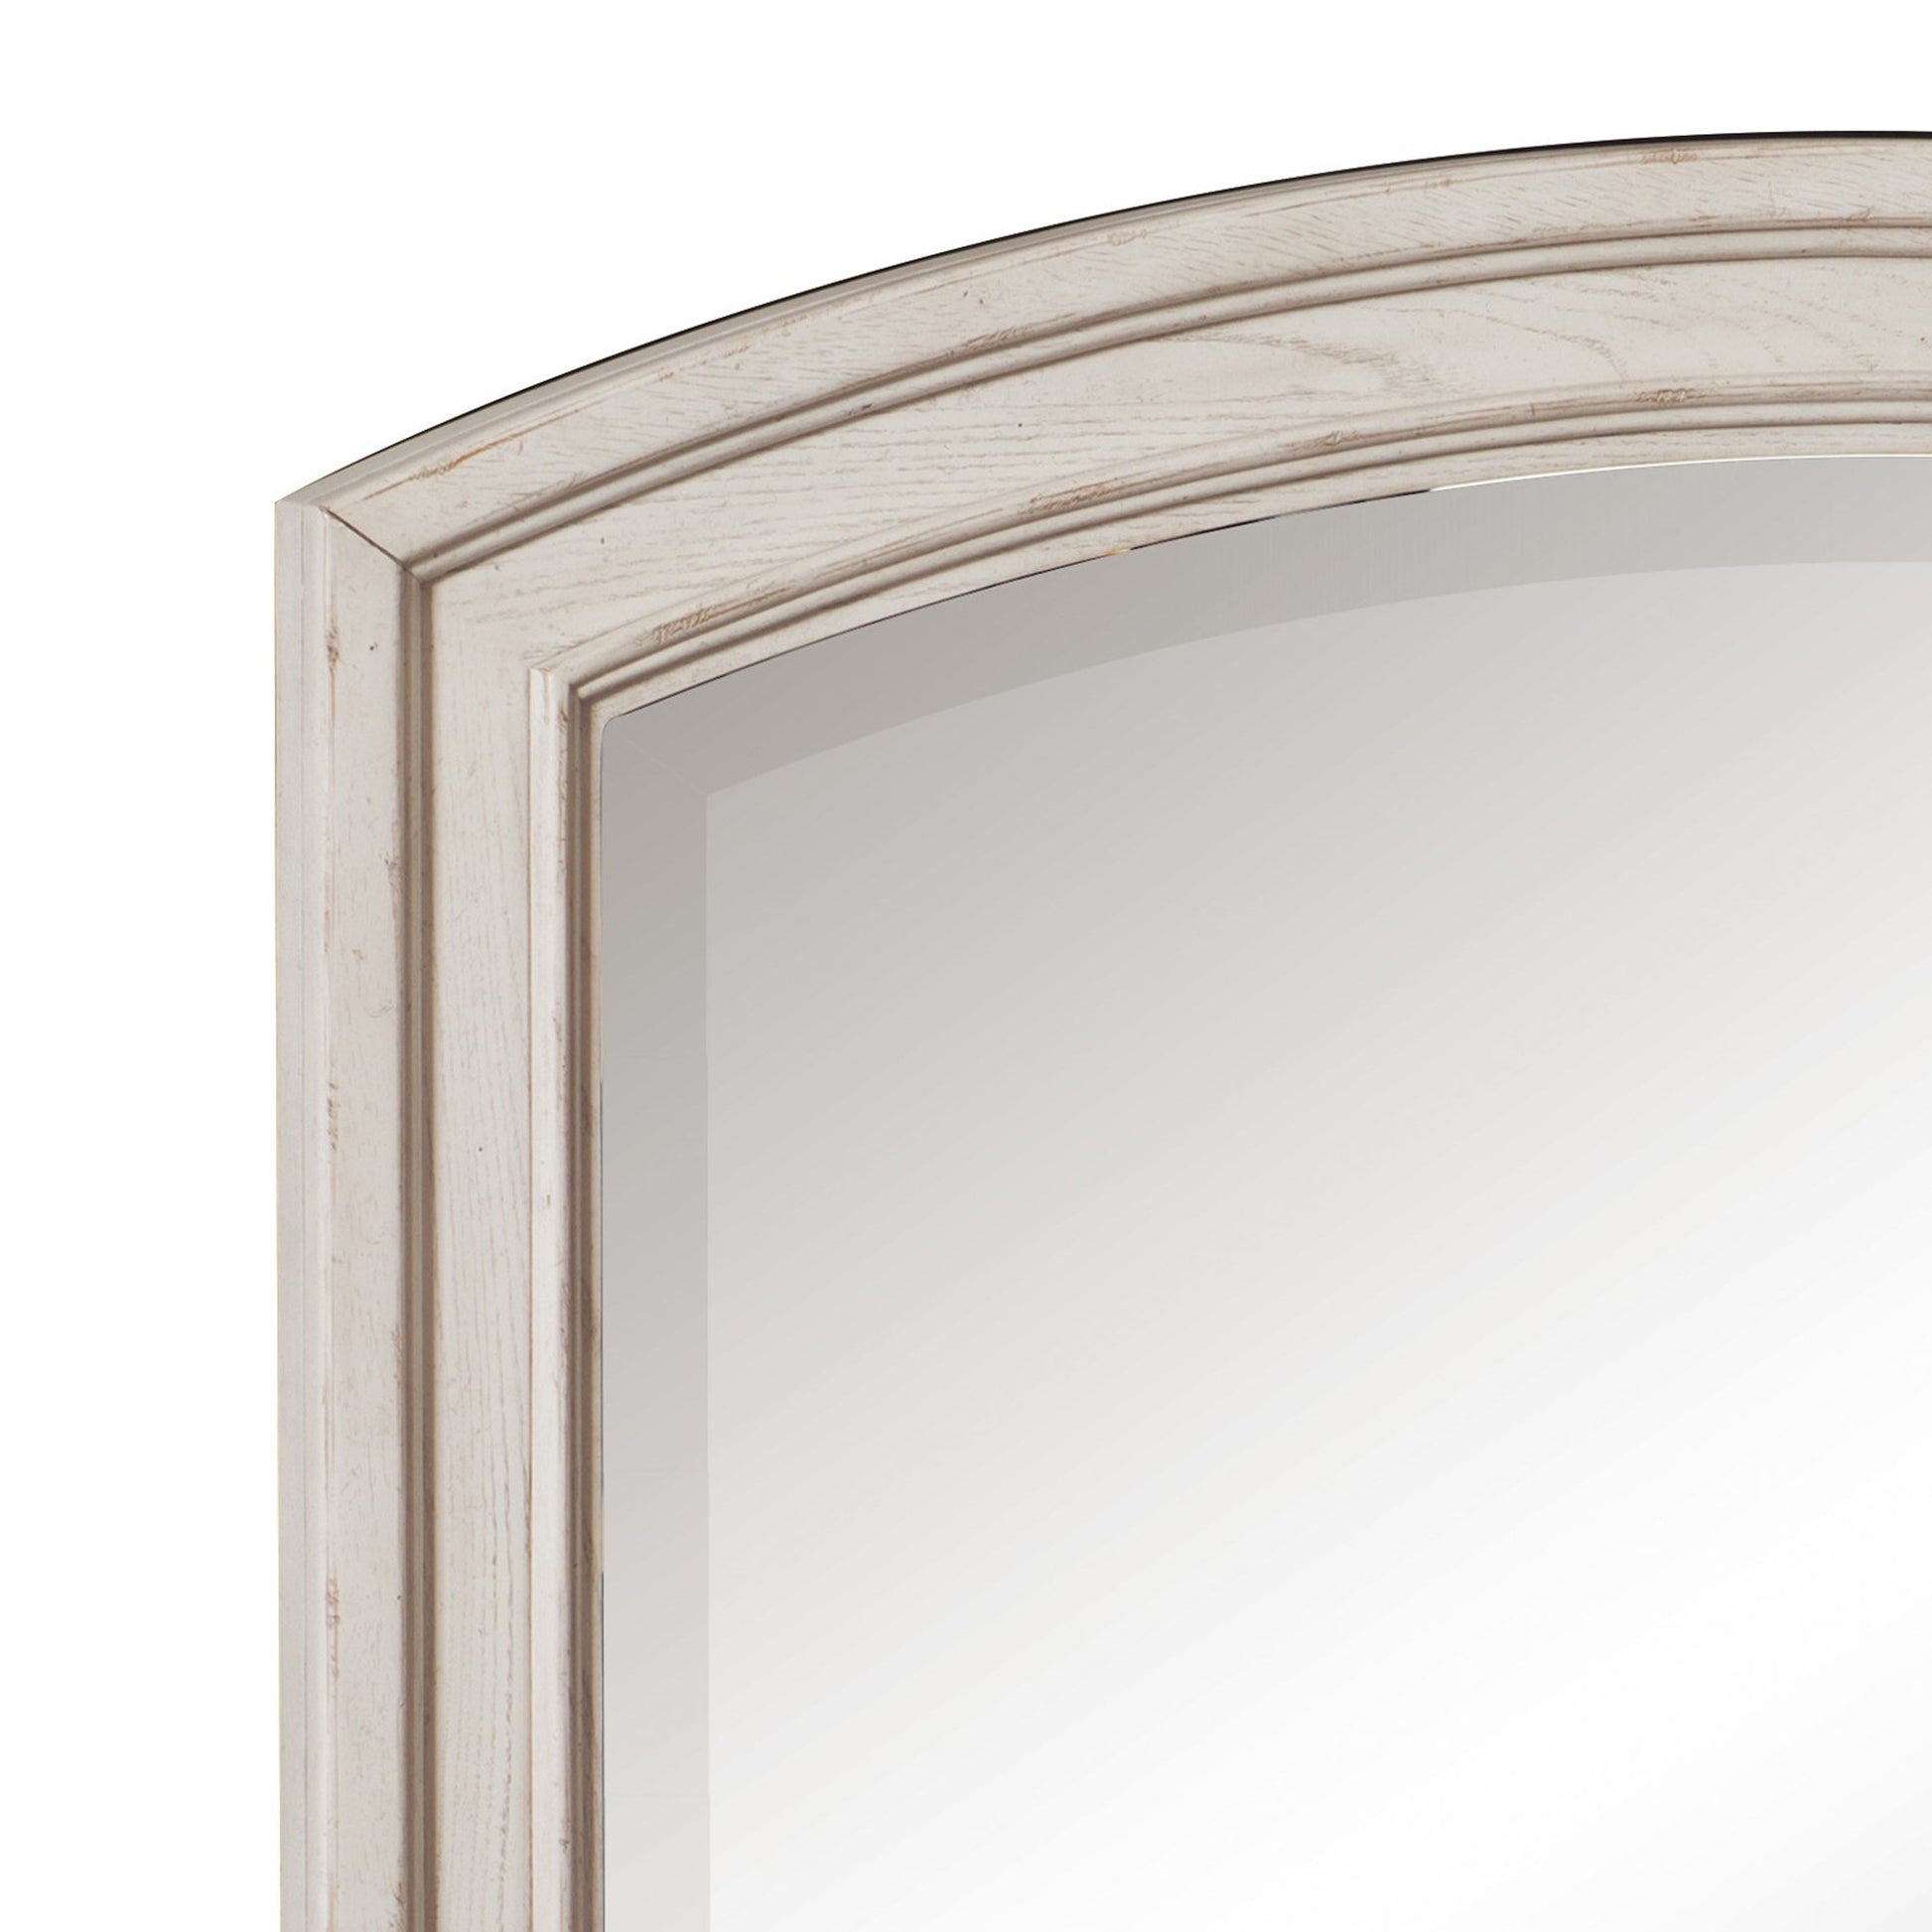 Benzara Antique White Wooden Bevelled Mirror With Raised Edges and Curved Top